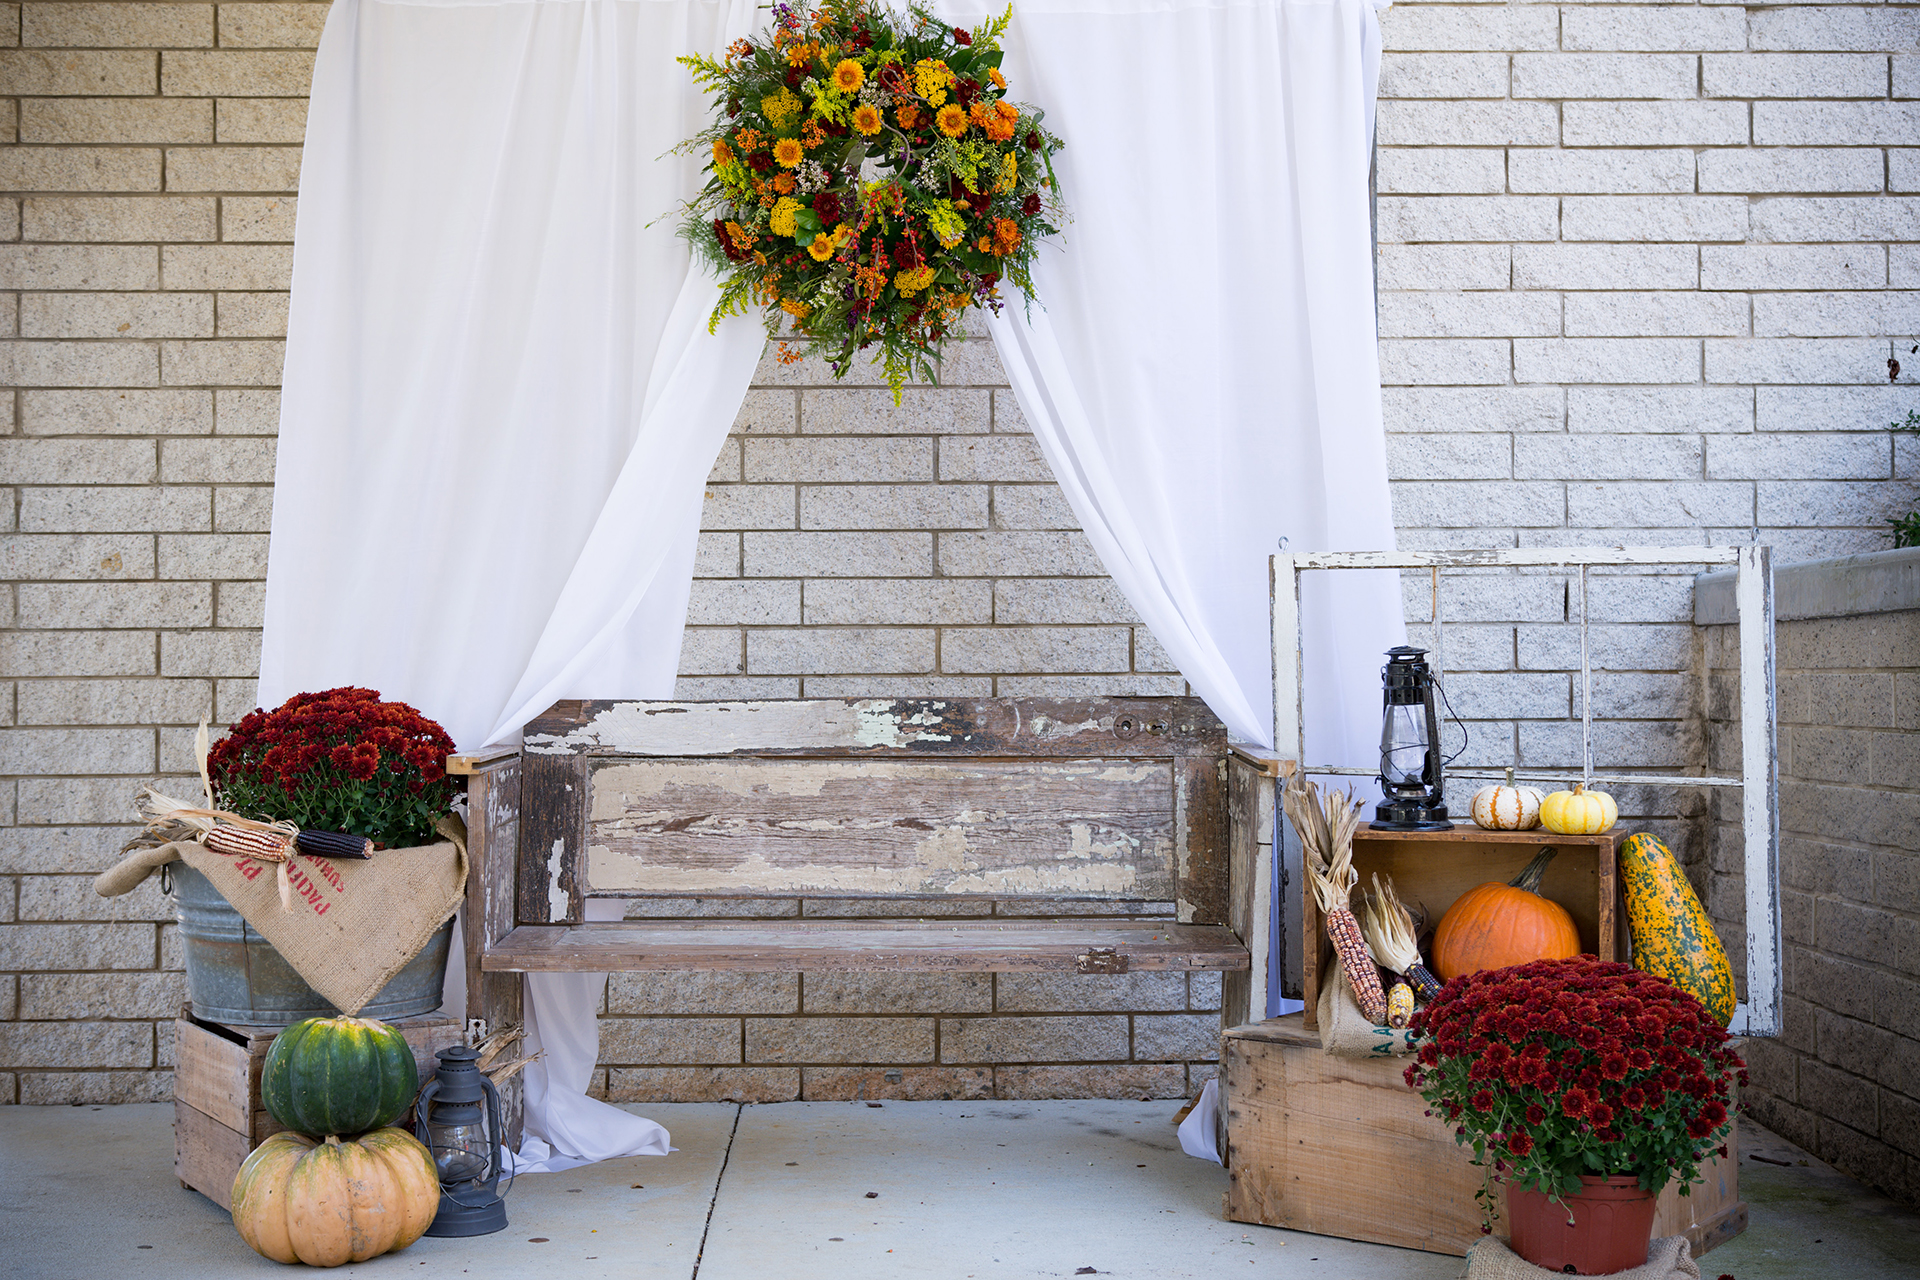 Front porch decorated with rustic items and burgundy flowers